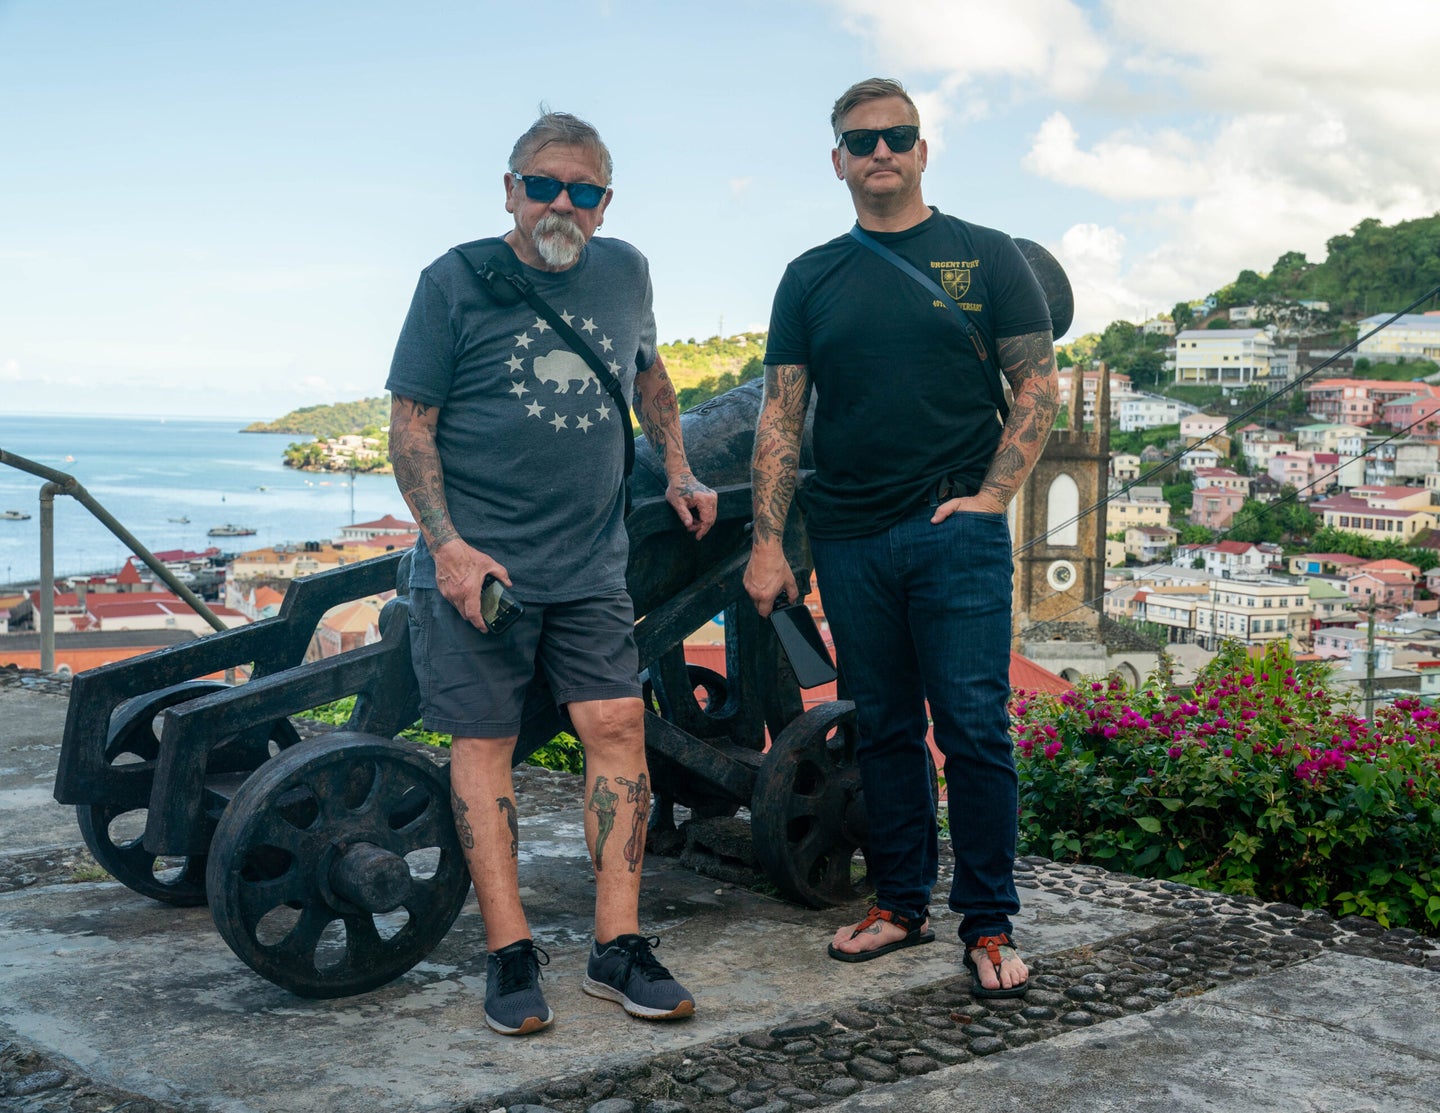 Father and son, both Rangers, pose for a photo in Grenada.